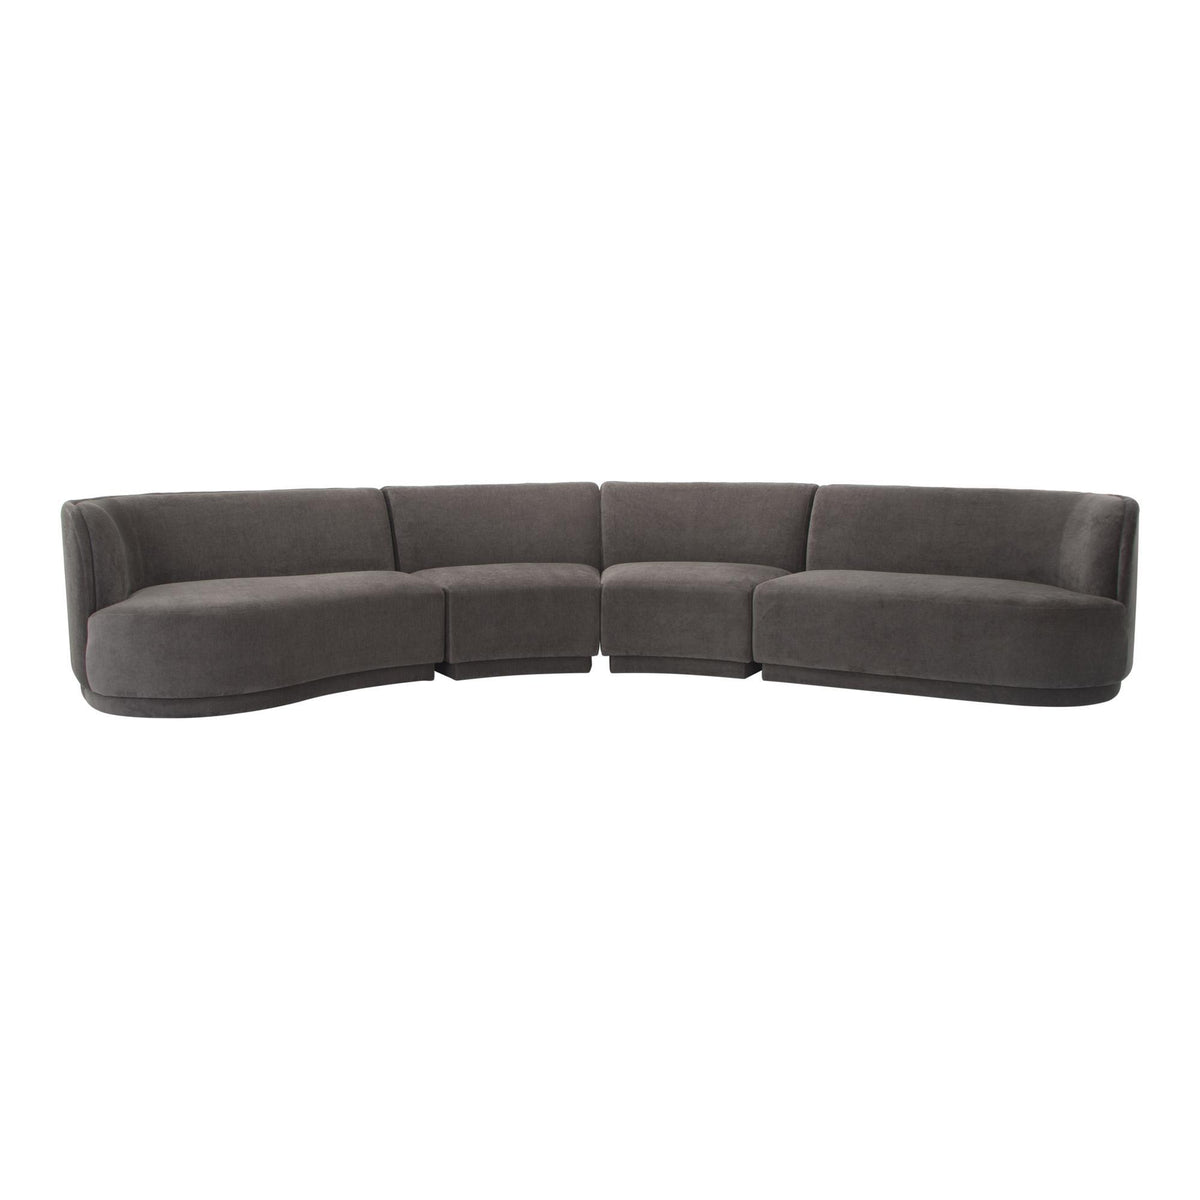 Moe's Home Collection Yoon Eclipse Modular Sectional Chaise Left Umbra Grey - JM-1024-25